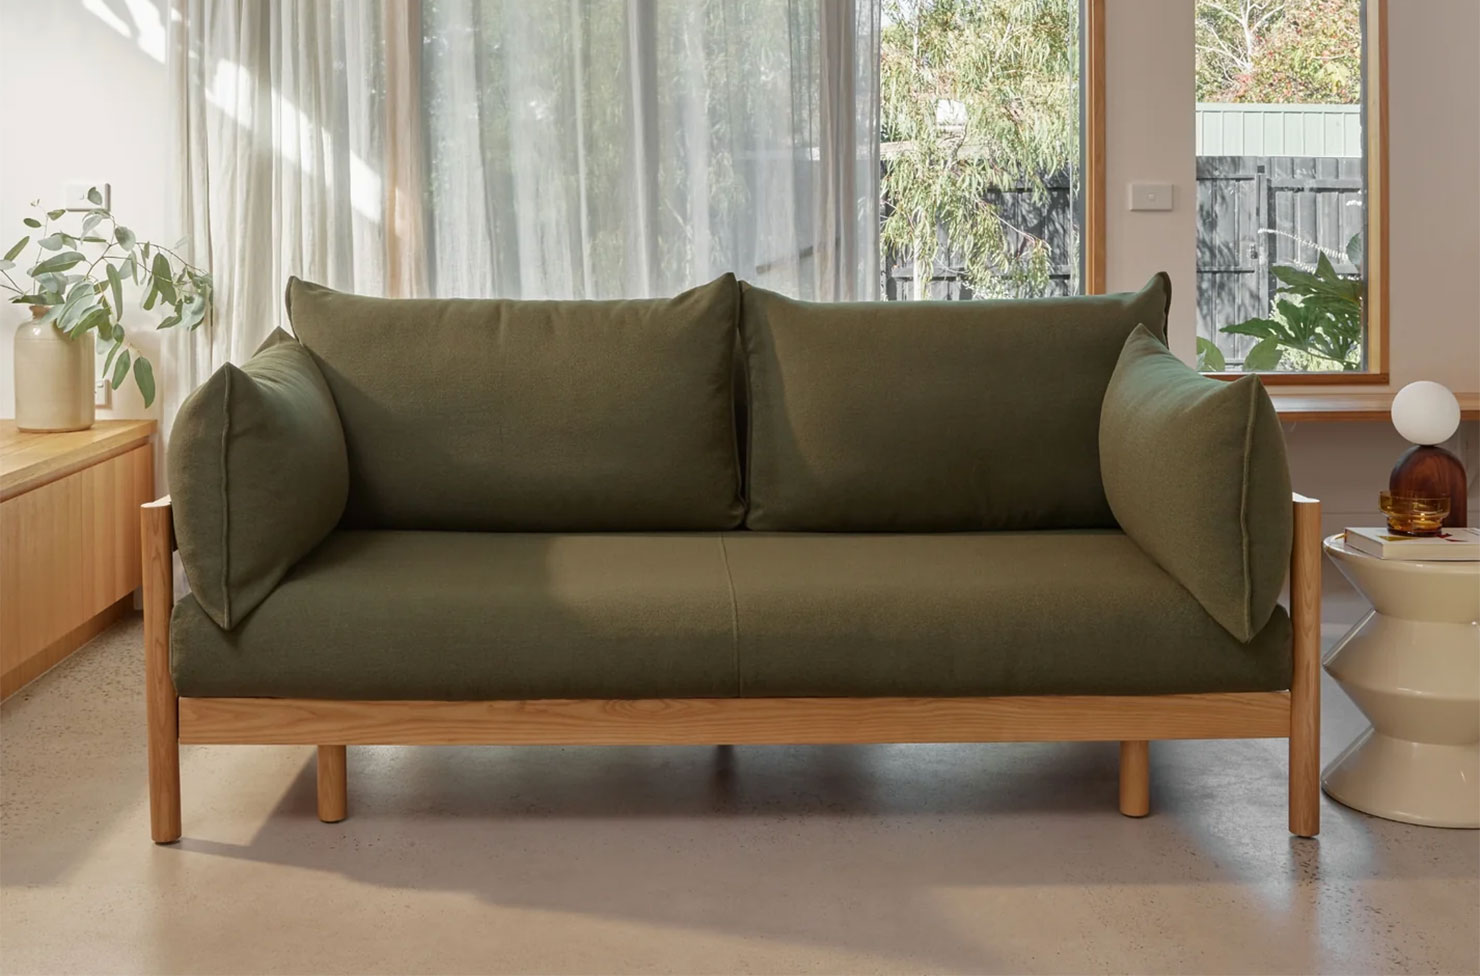 The Best Sofa Beds To Now For